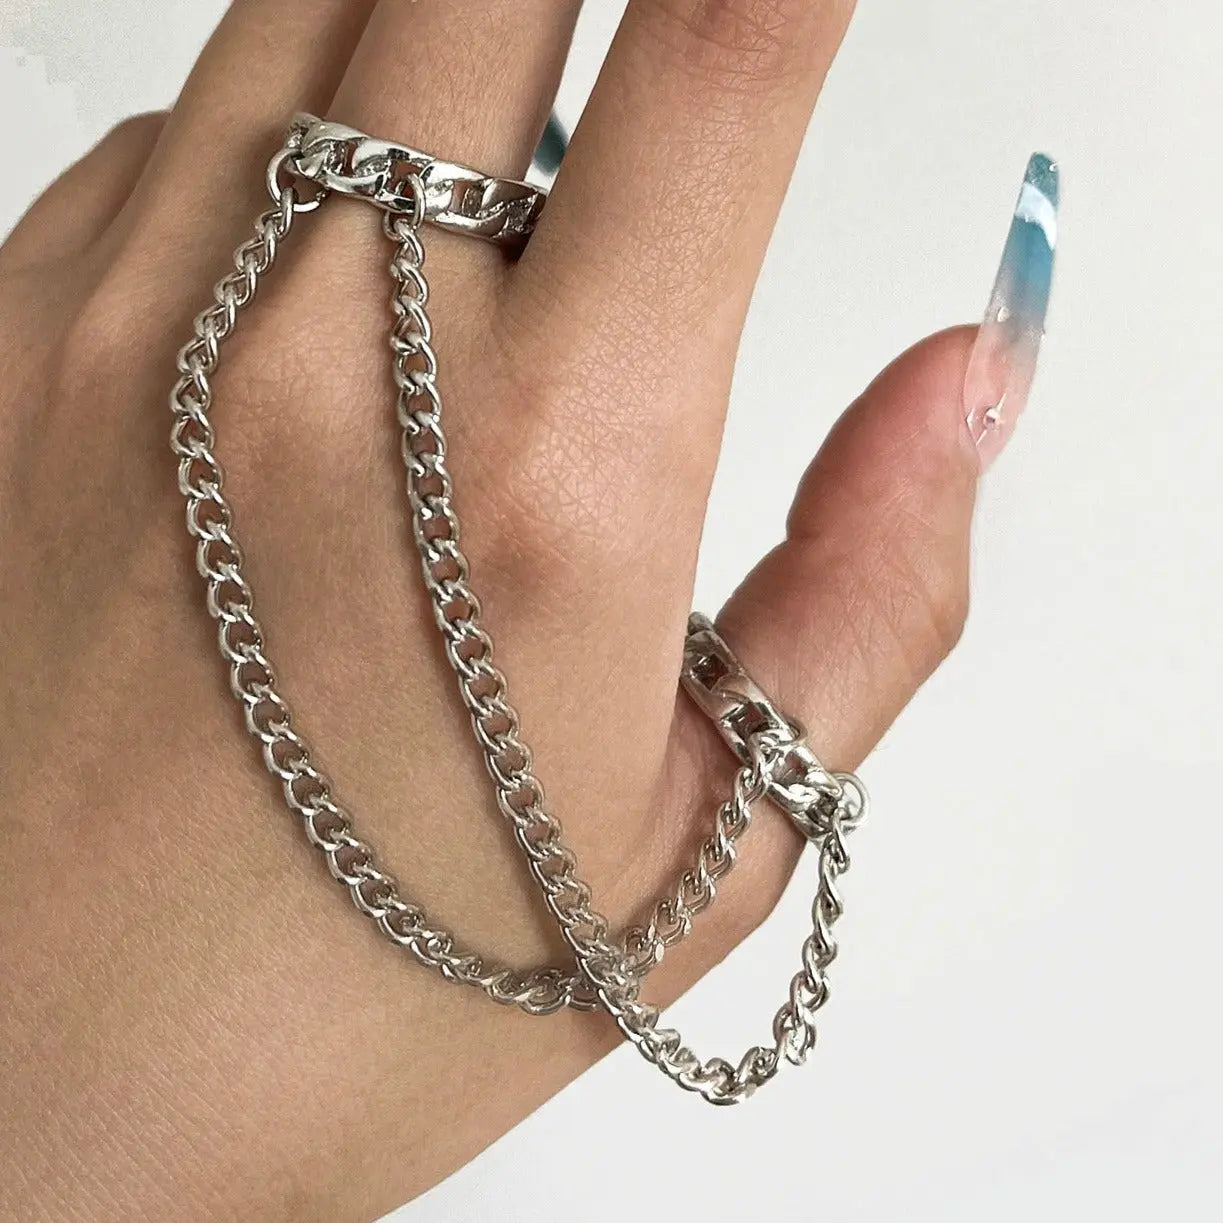 Chain Ring Bracelet Set - Adjustable Ring Chain Hand Accessories